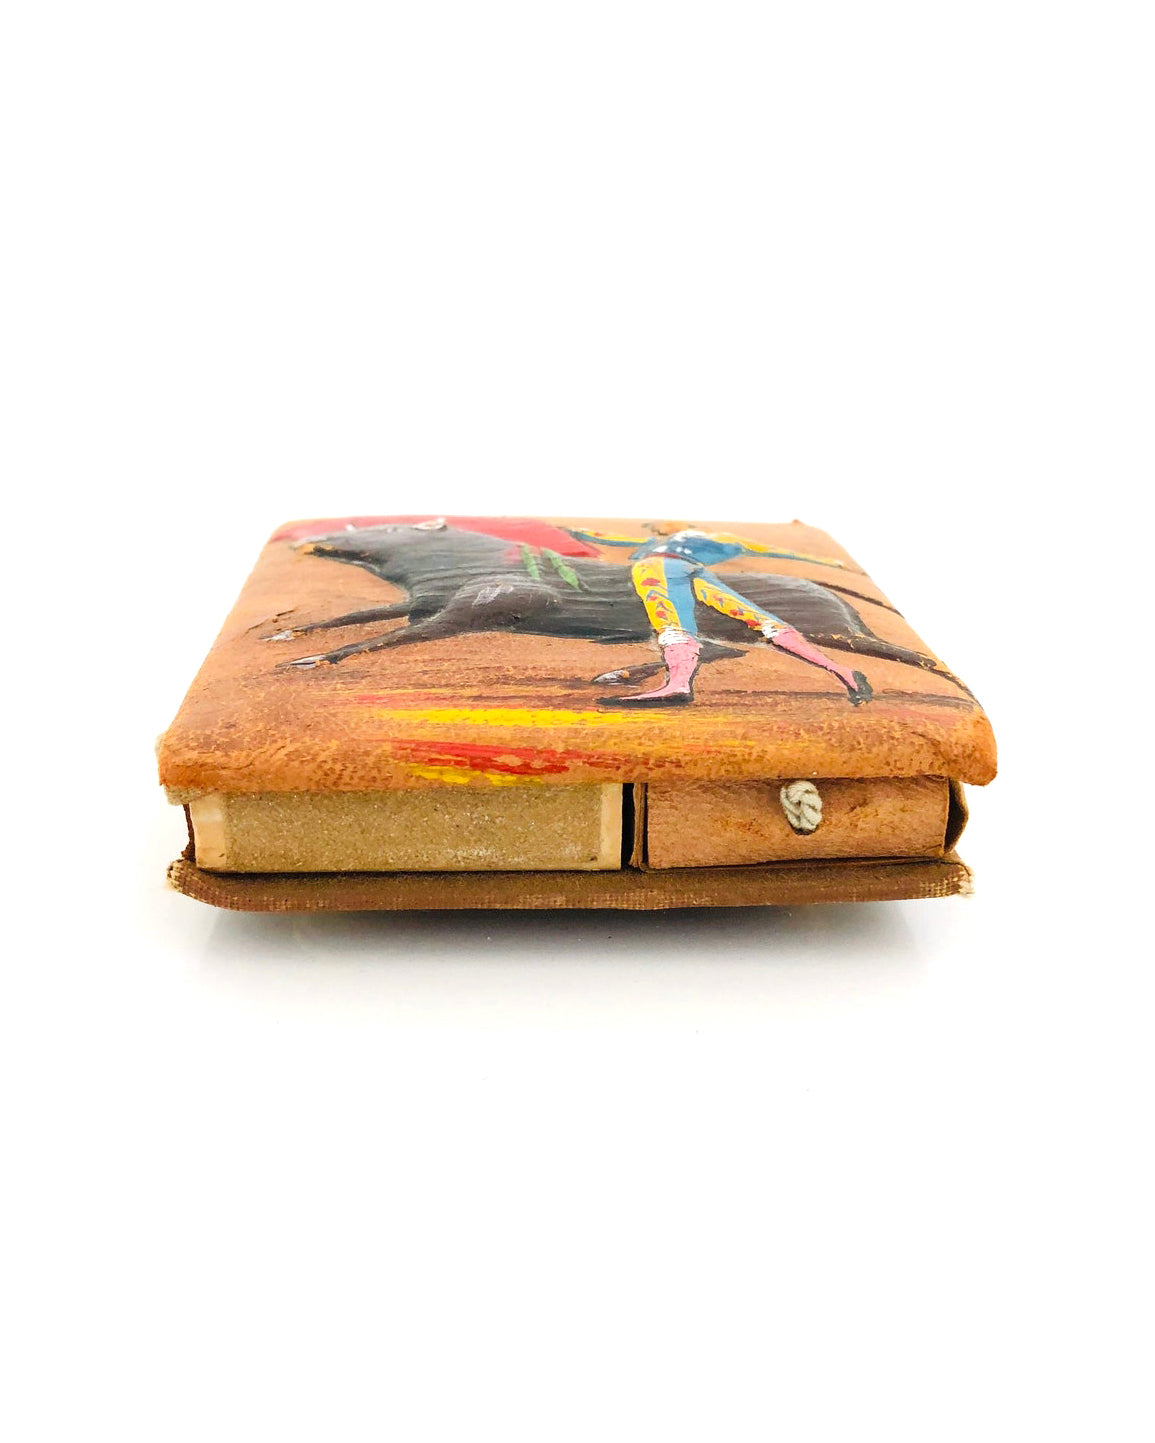 Vintage Matador Leather Matchbox Cover with Drawers, 1970s